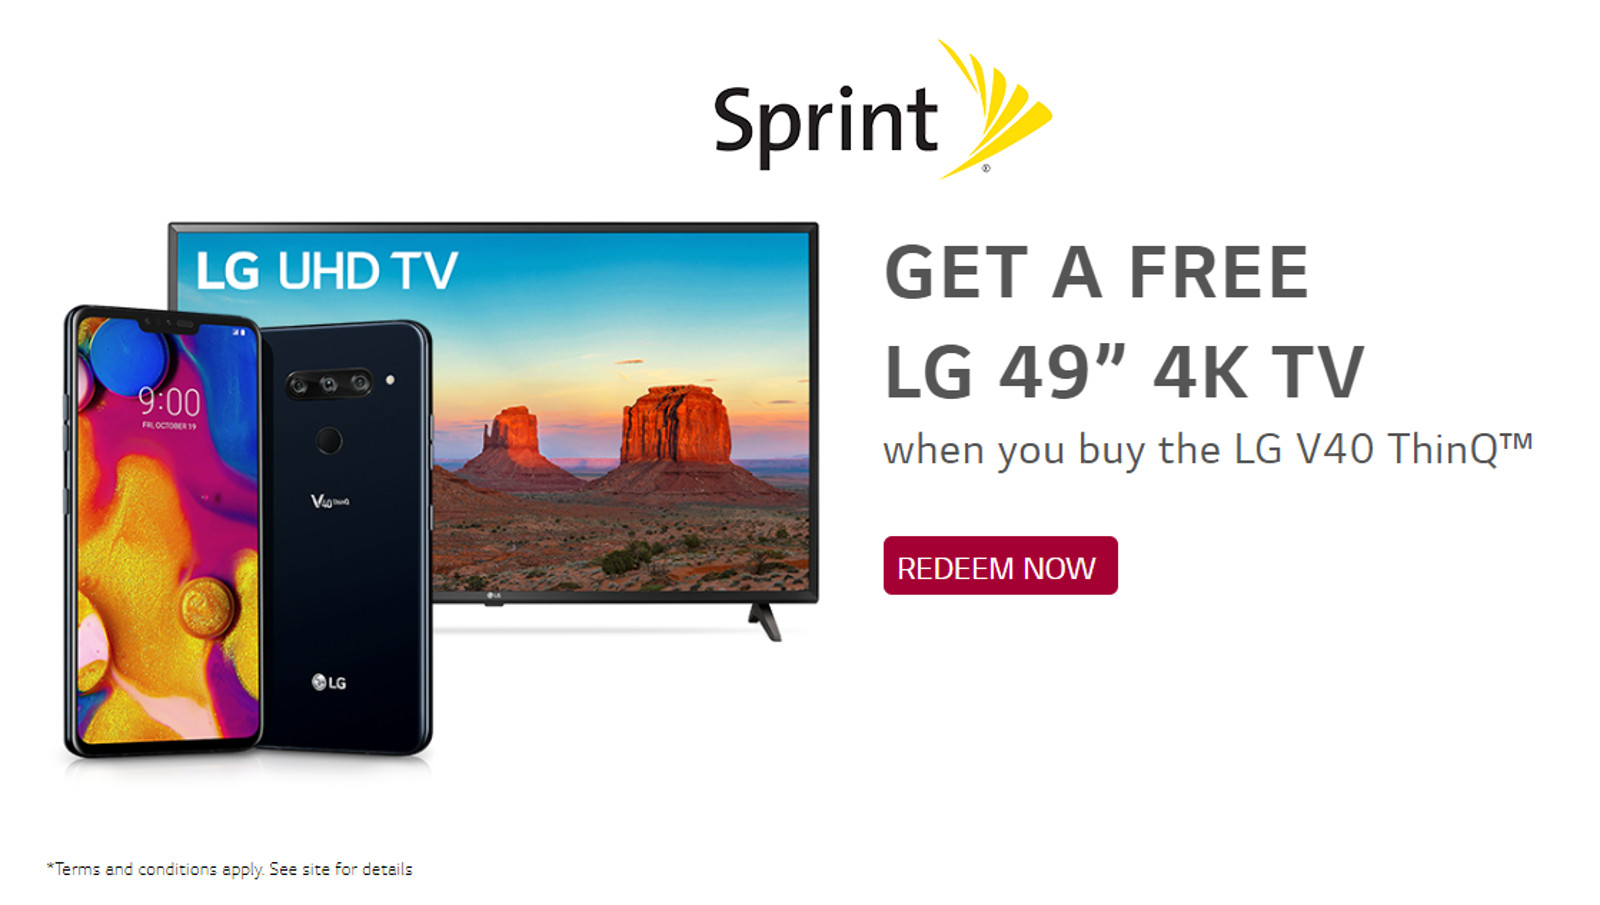 Sprint is offering a free 4K TV with an LG V40 purchase.